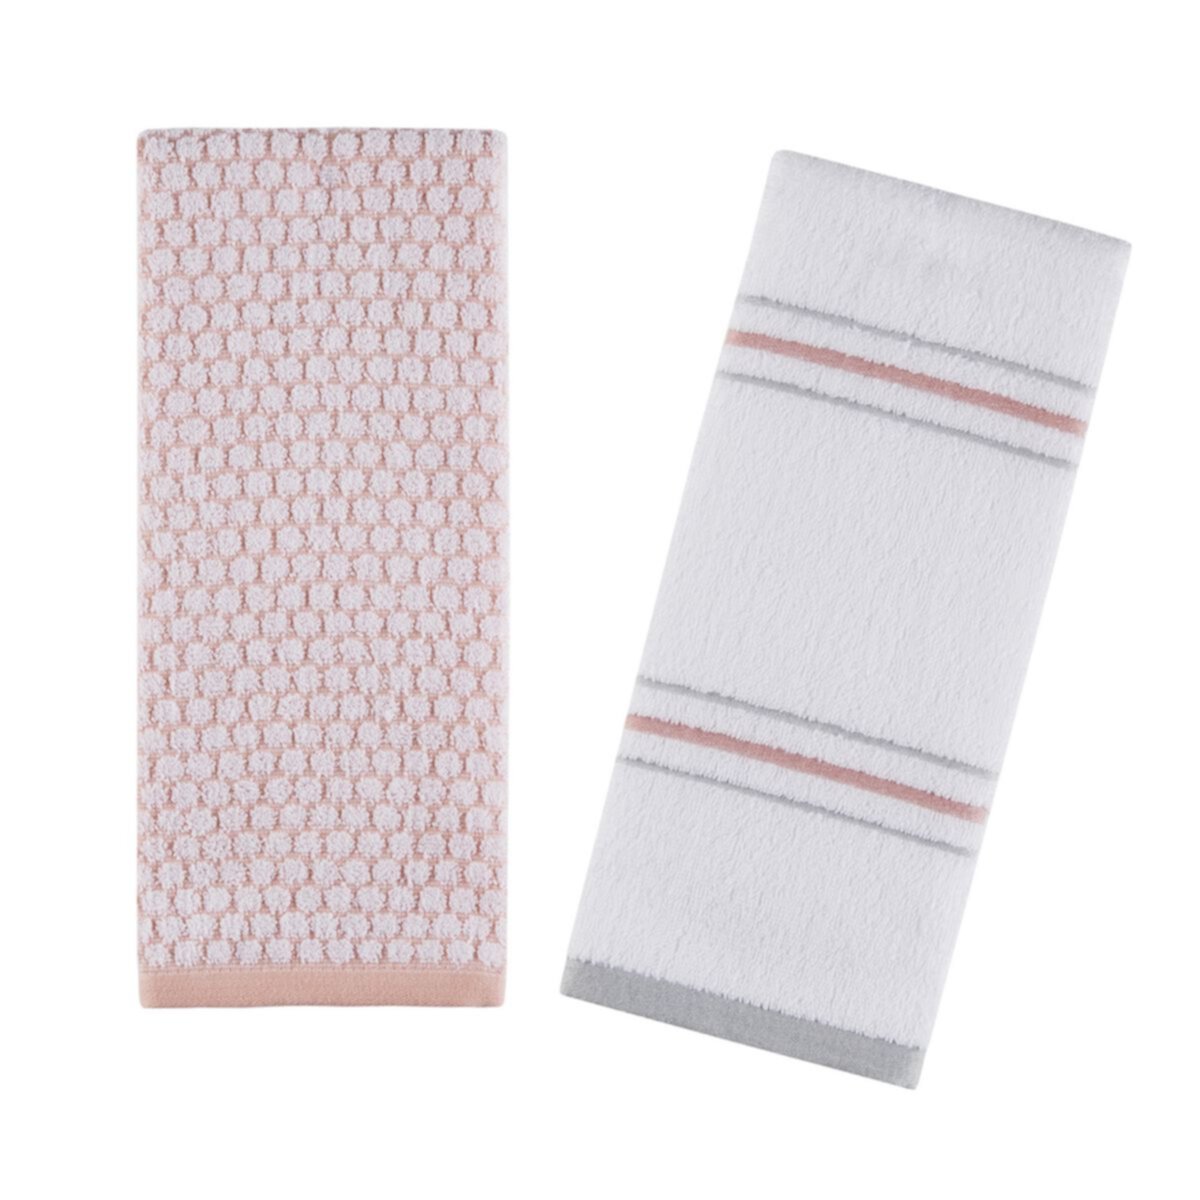 The Big One® Coral 2 Pack Hand Towel The Big One